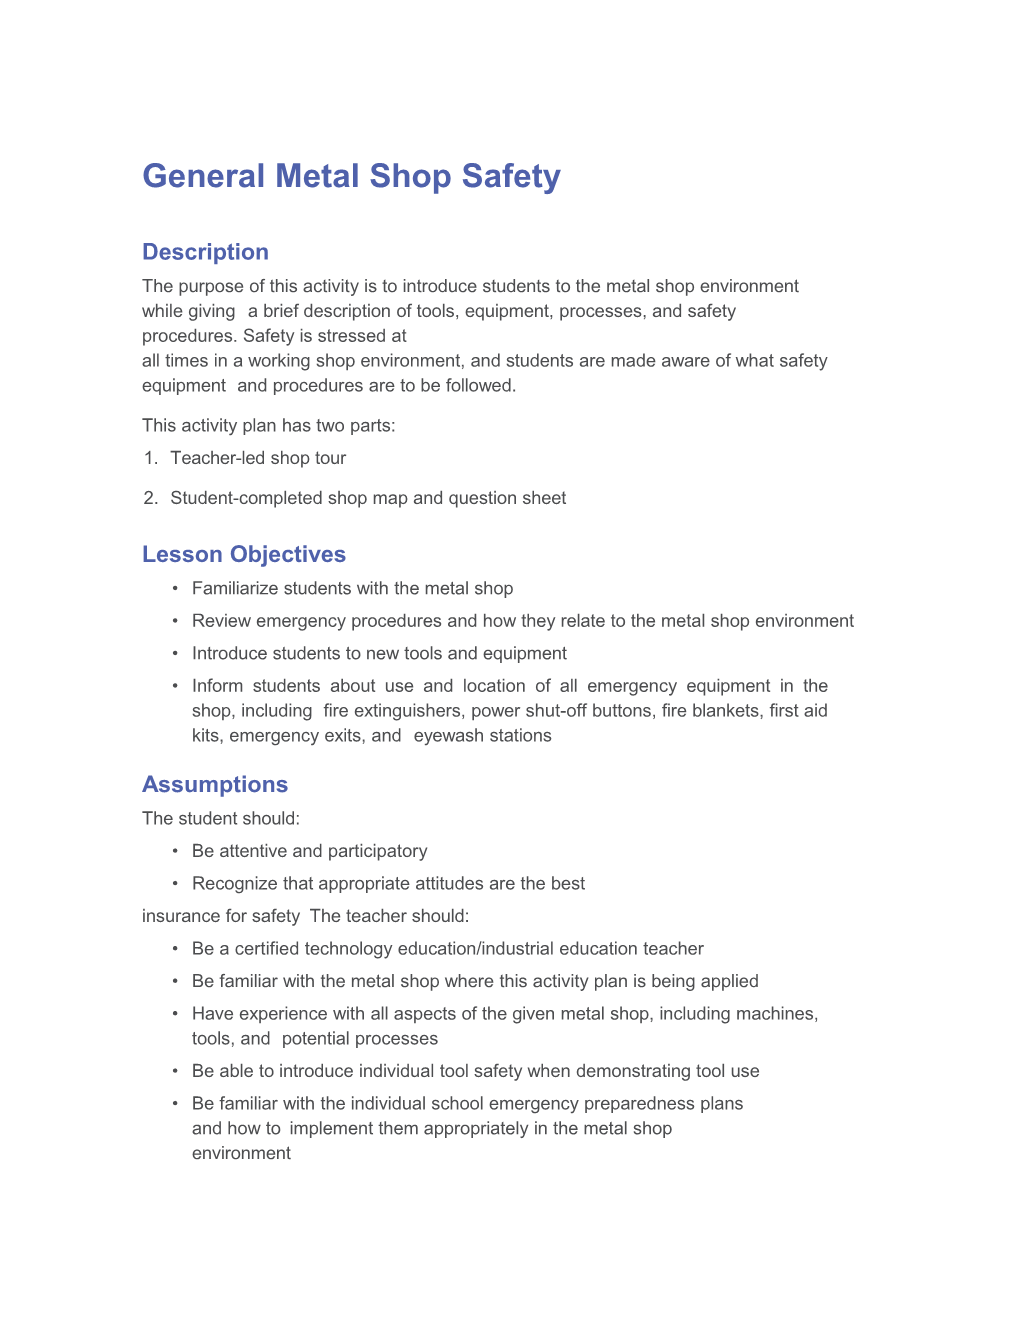 Alltimesina Workingshop Environment,And Studentsaremade Aware of Whatsafety